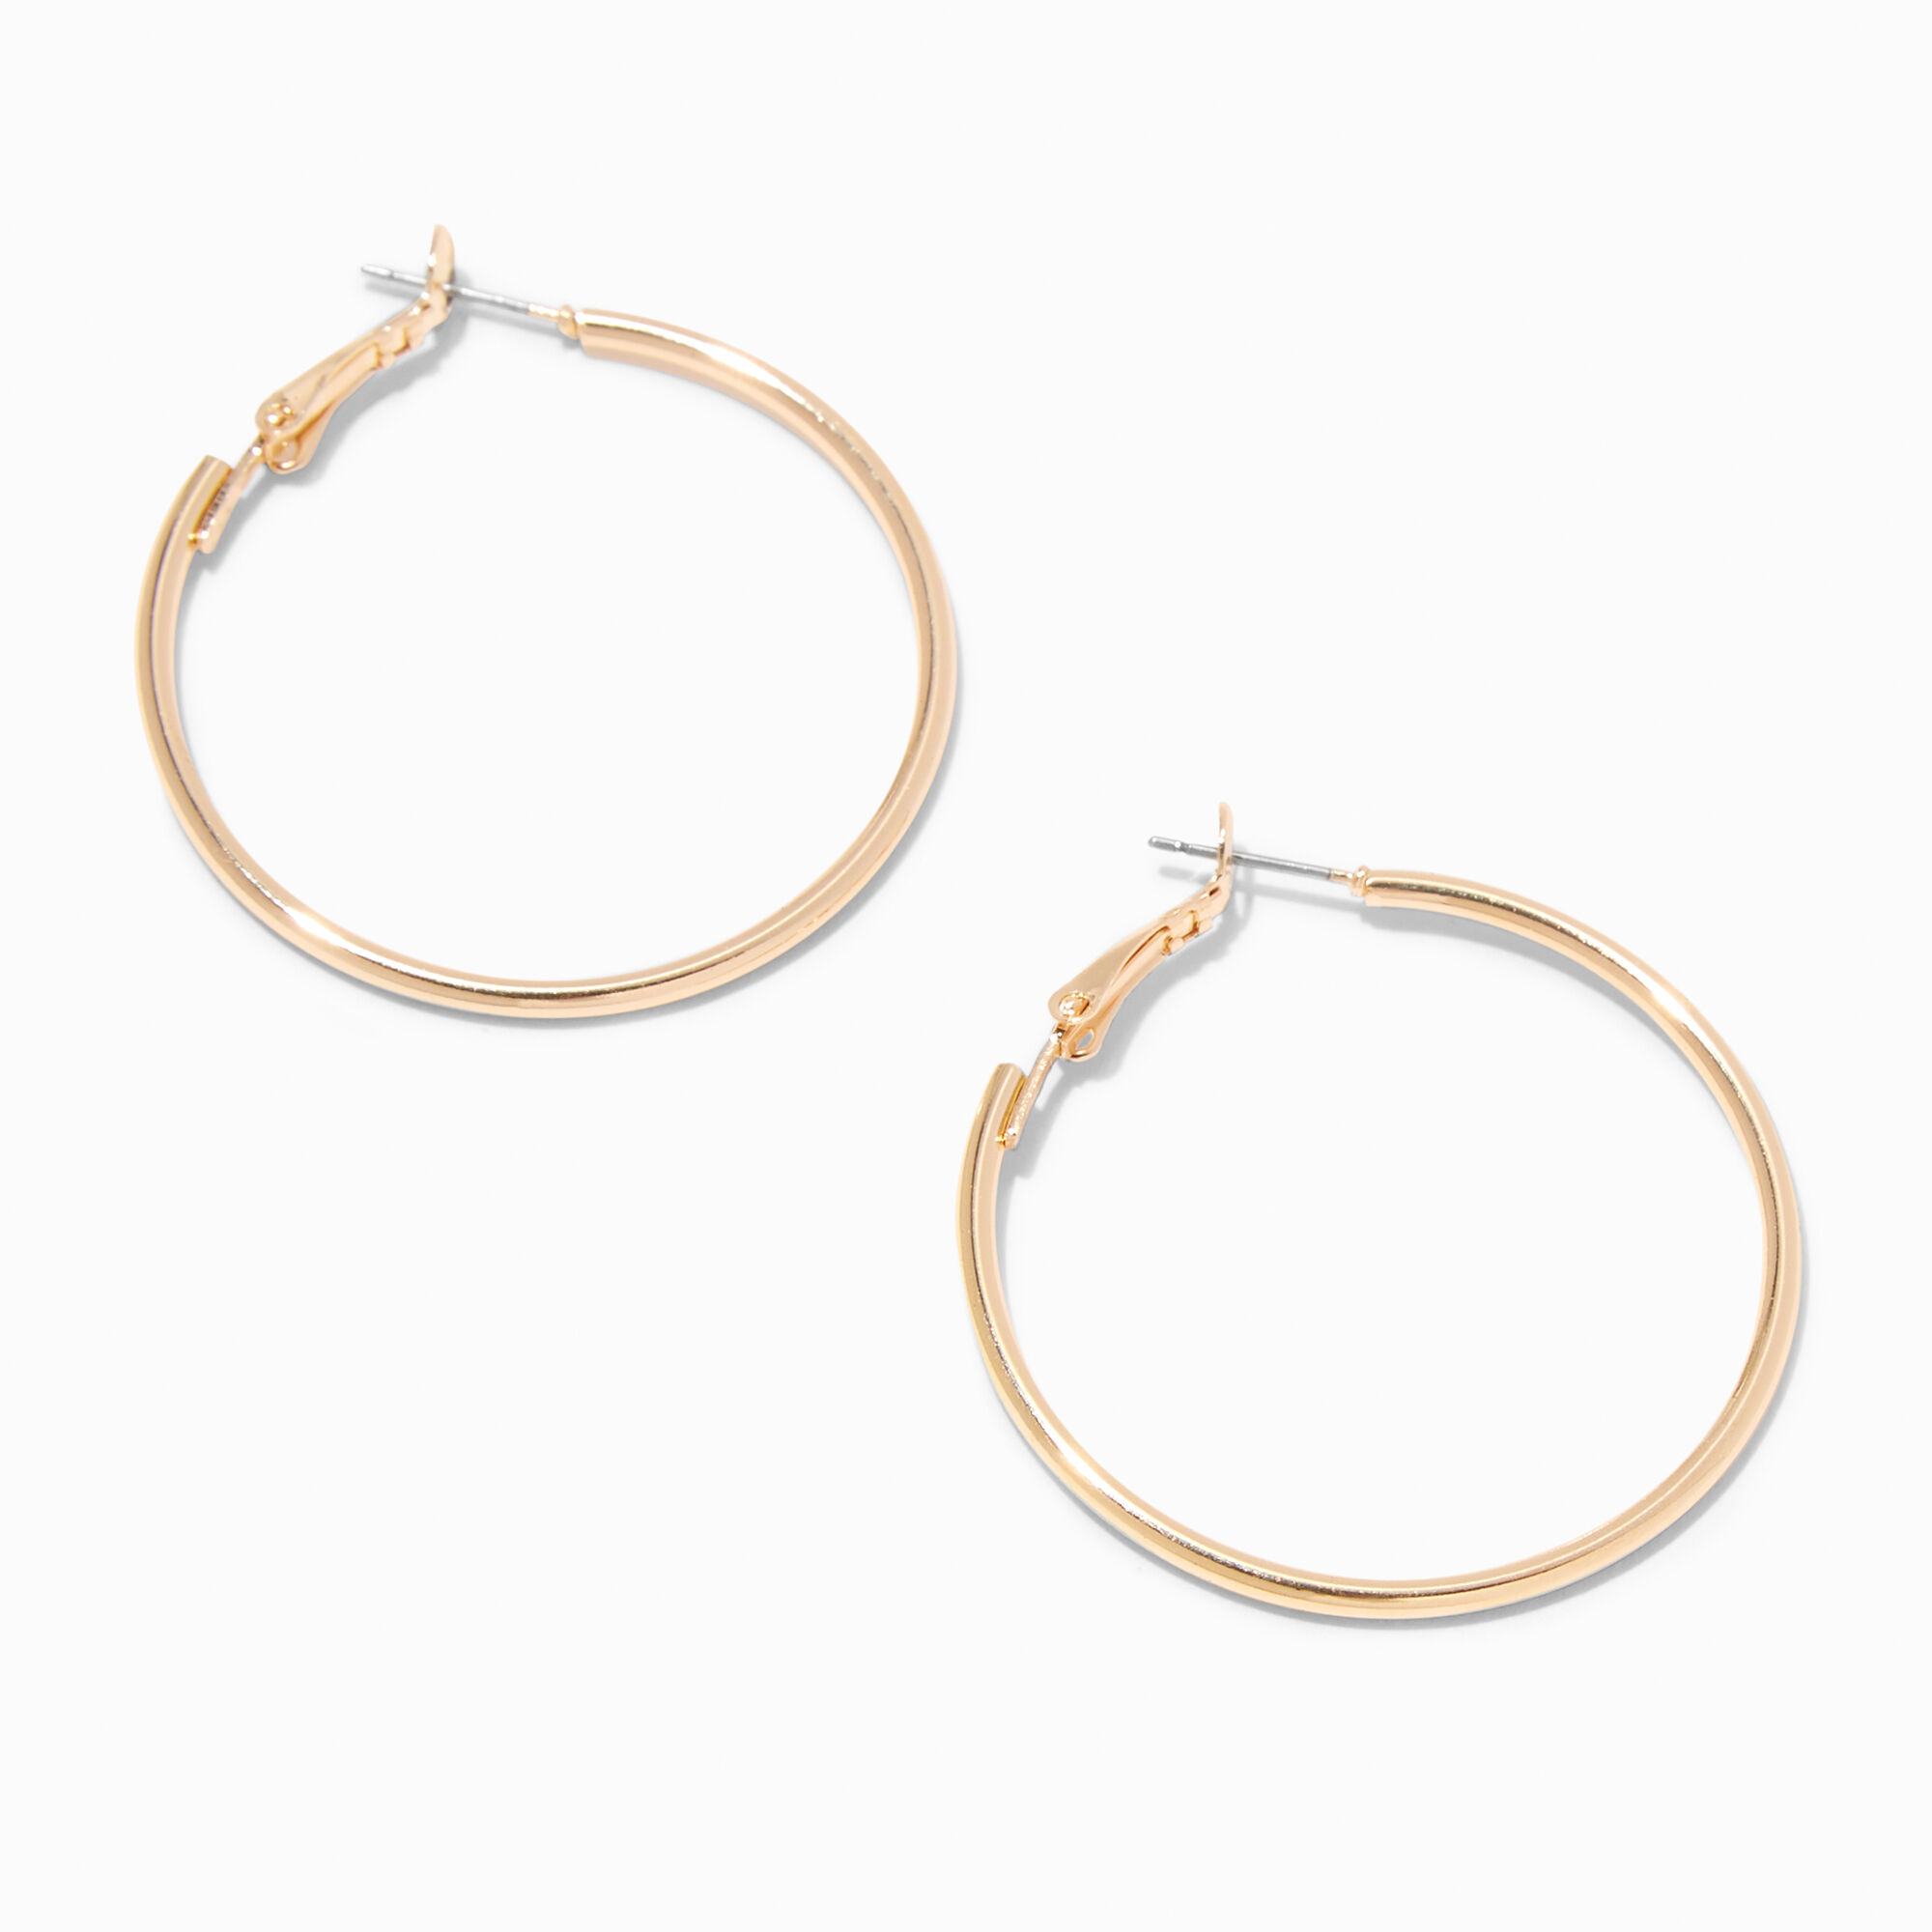 View Claires Recycled Jewelry Tone 40MM Hoop Earrings Gold information